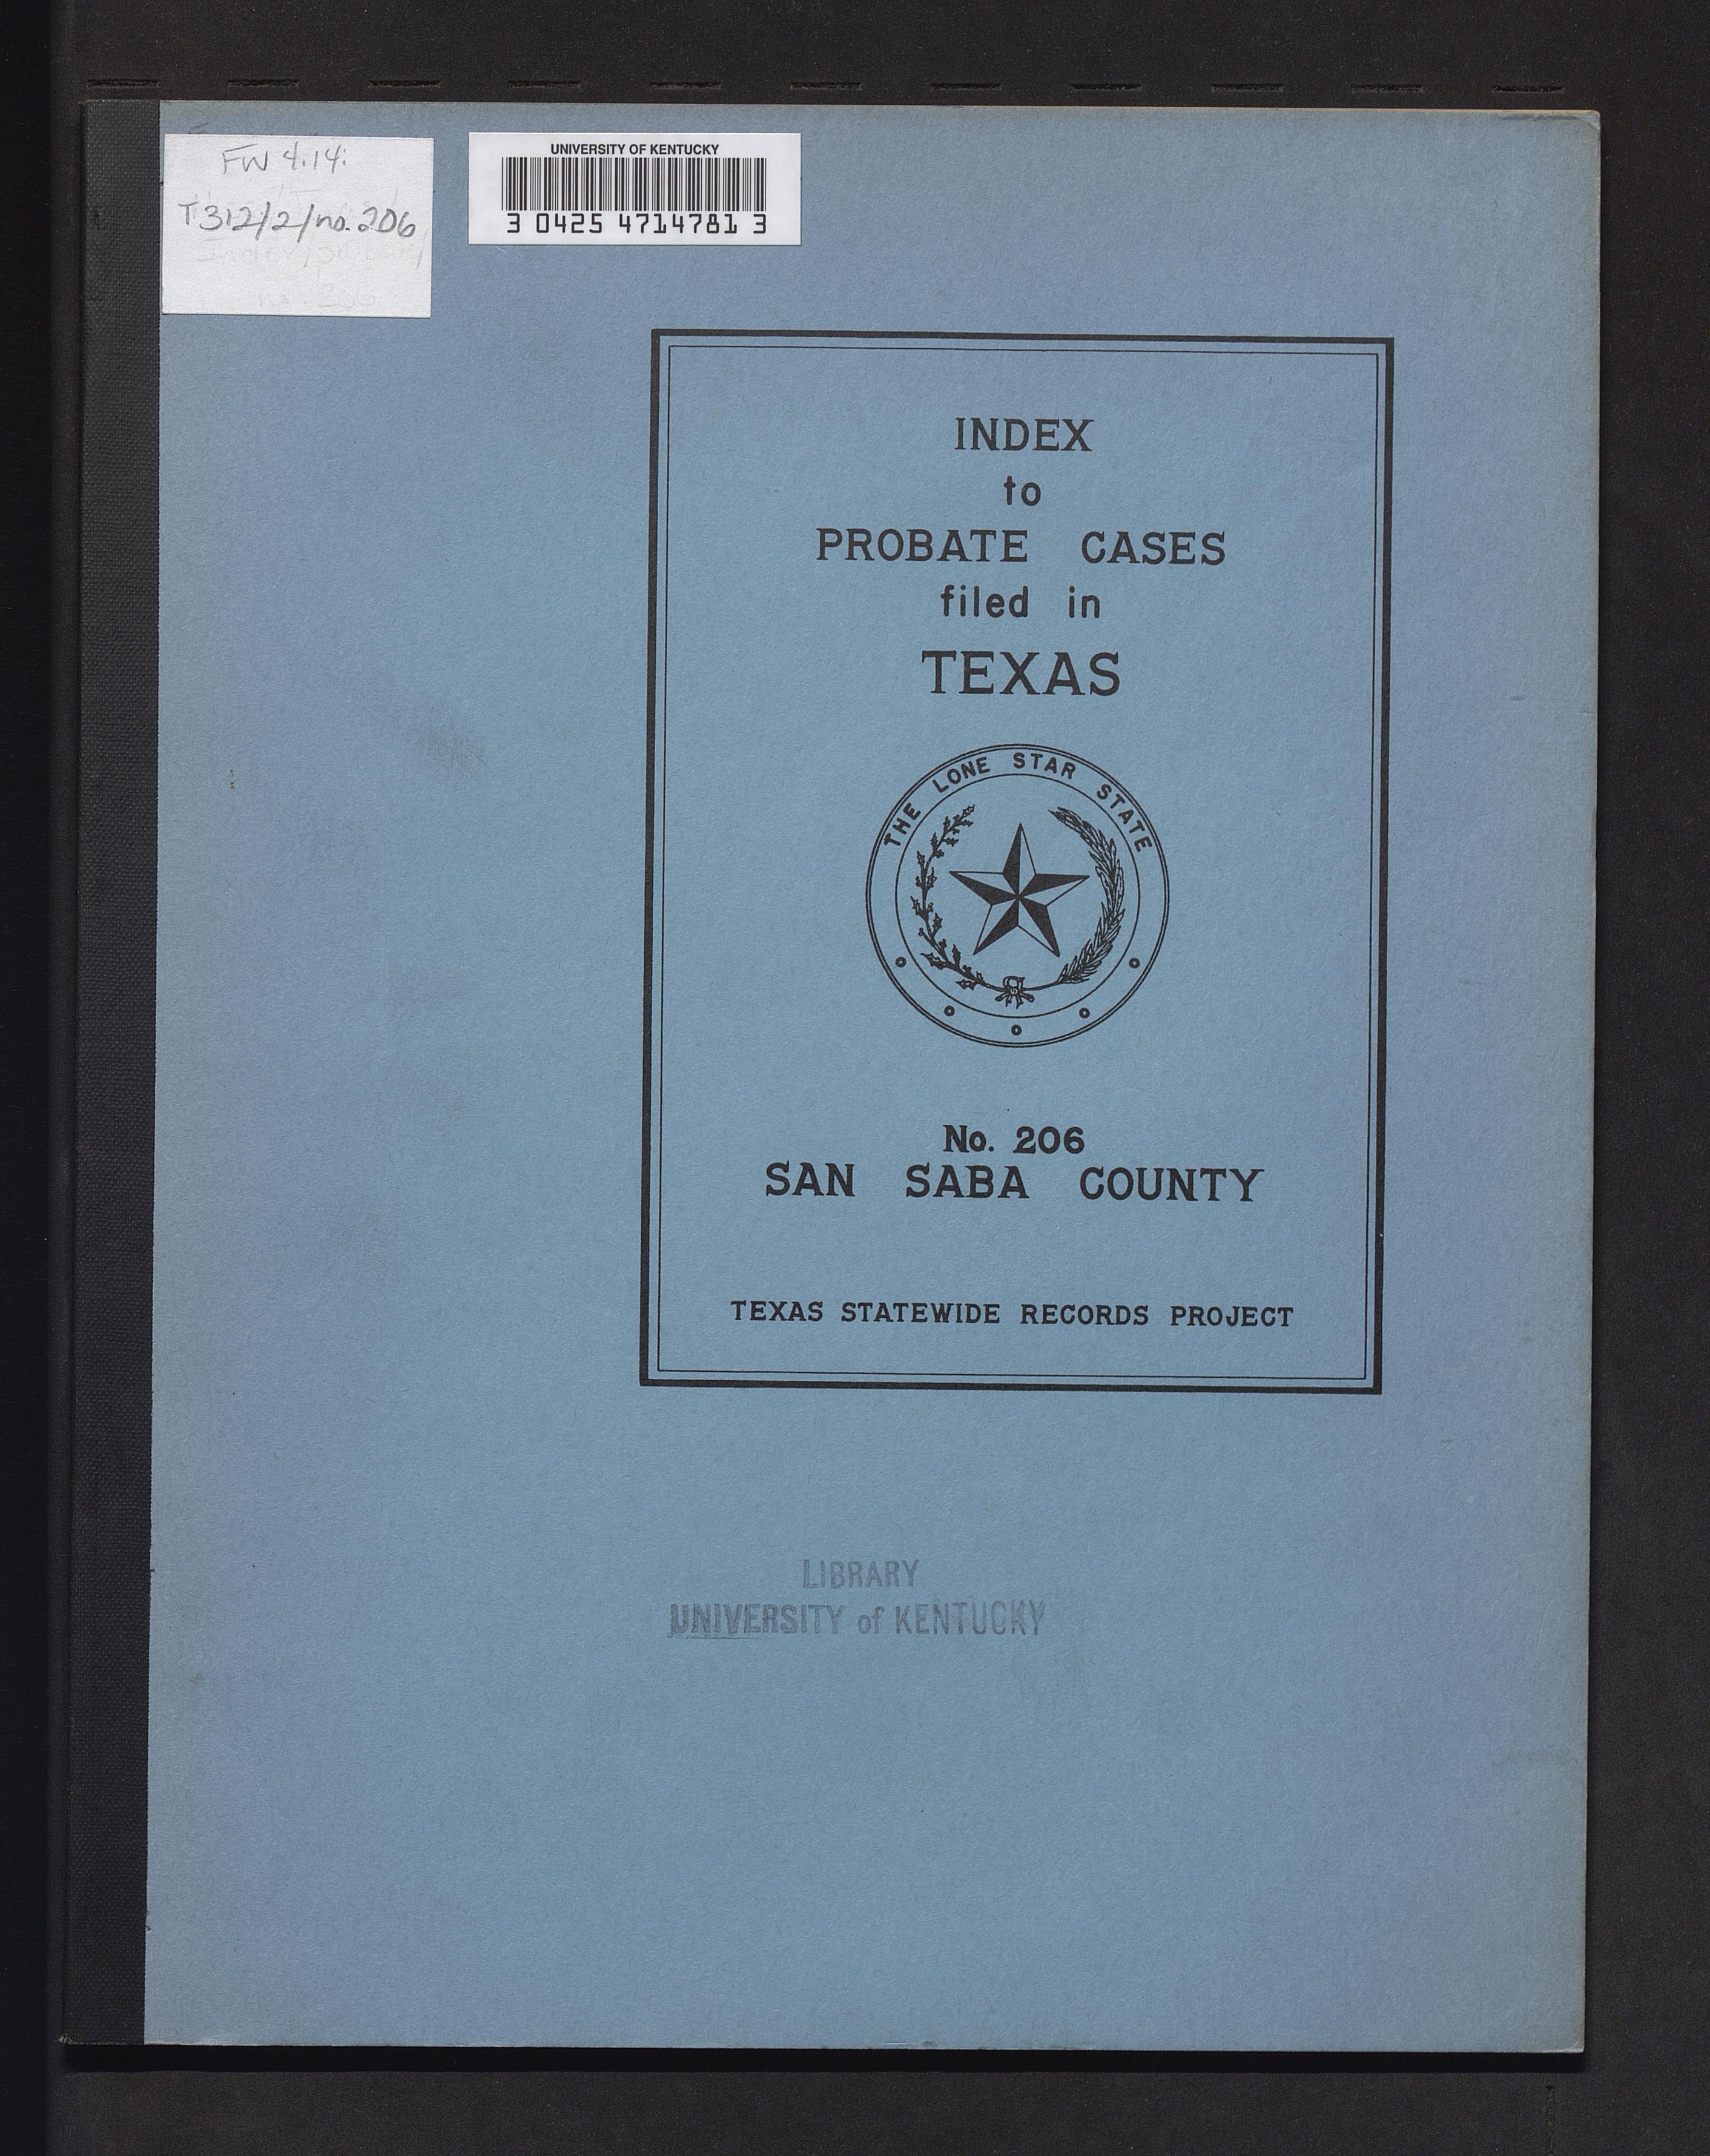 Index to Cases of Texas, no. 206, Saba County, Jan. 30, 1866 - 28, 1939